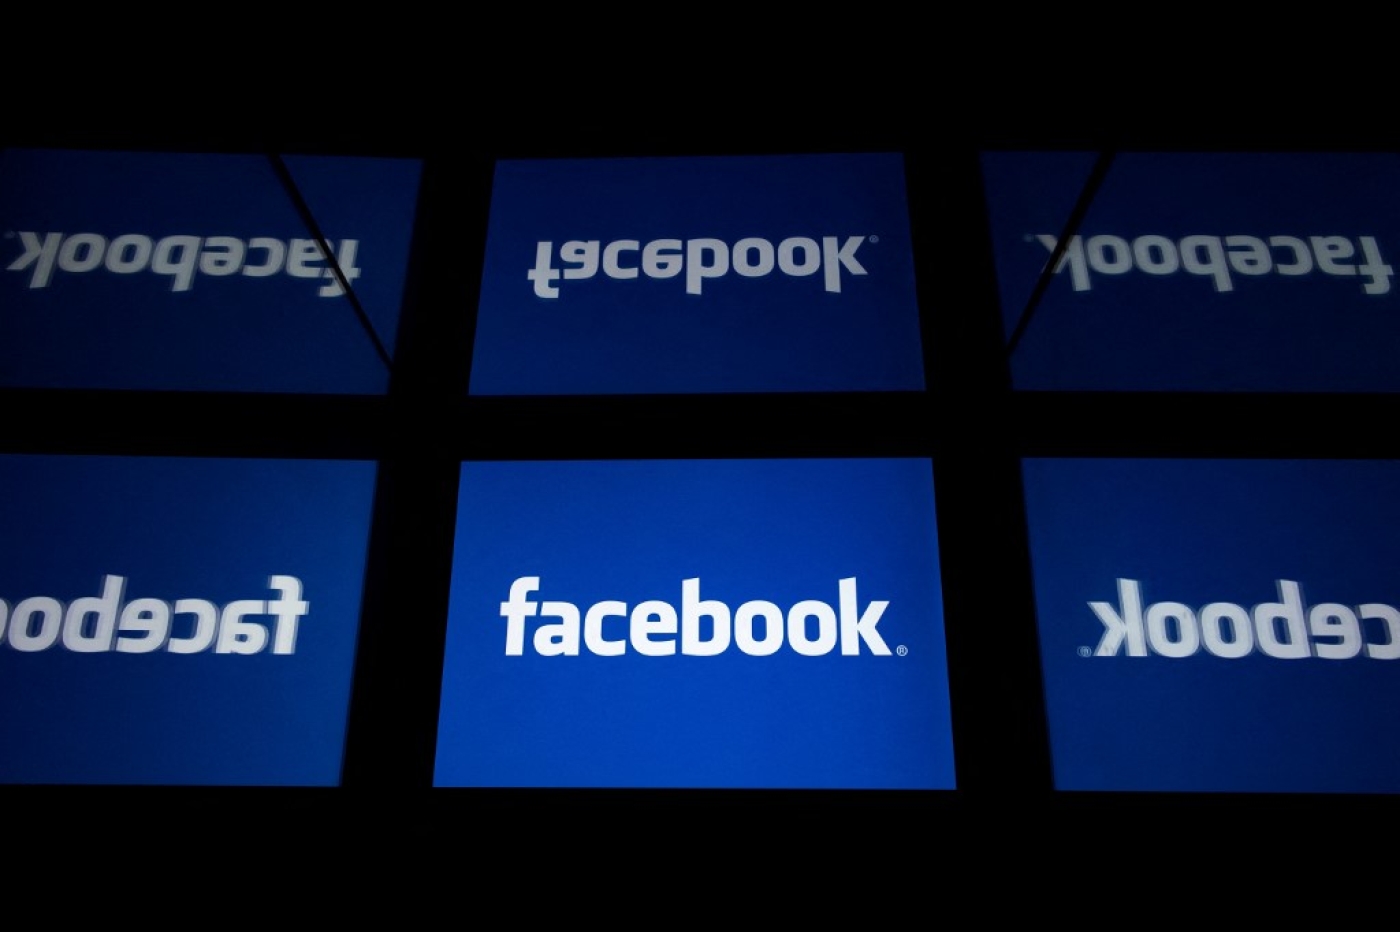 Facebook also announced that it removed dozens of accounts from Iran, Israel, and Egypt